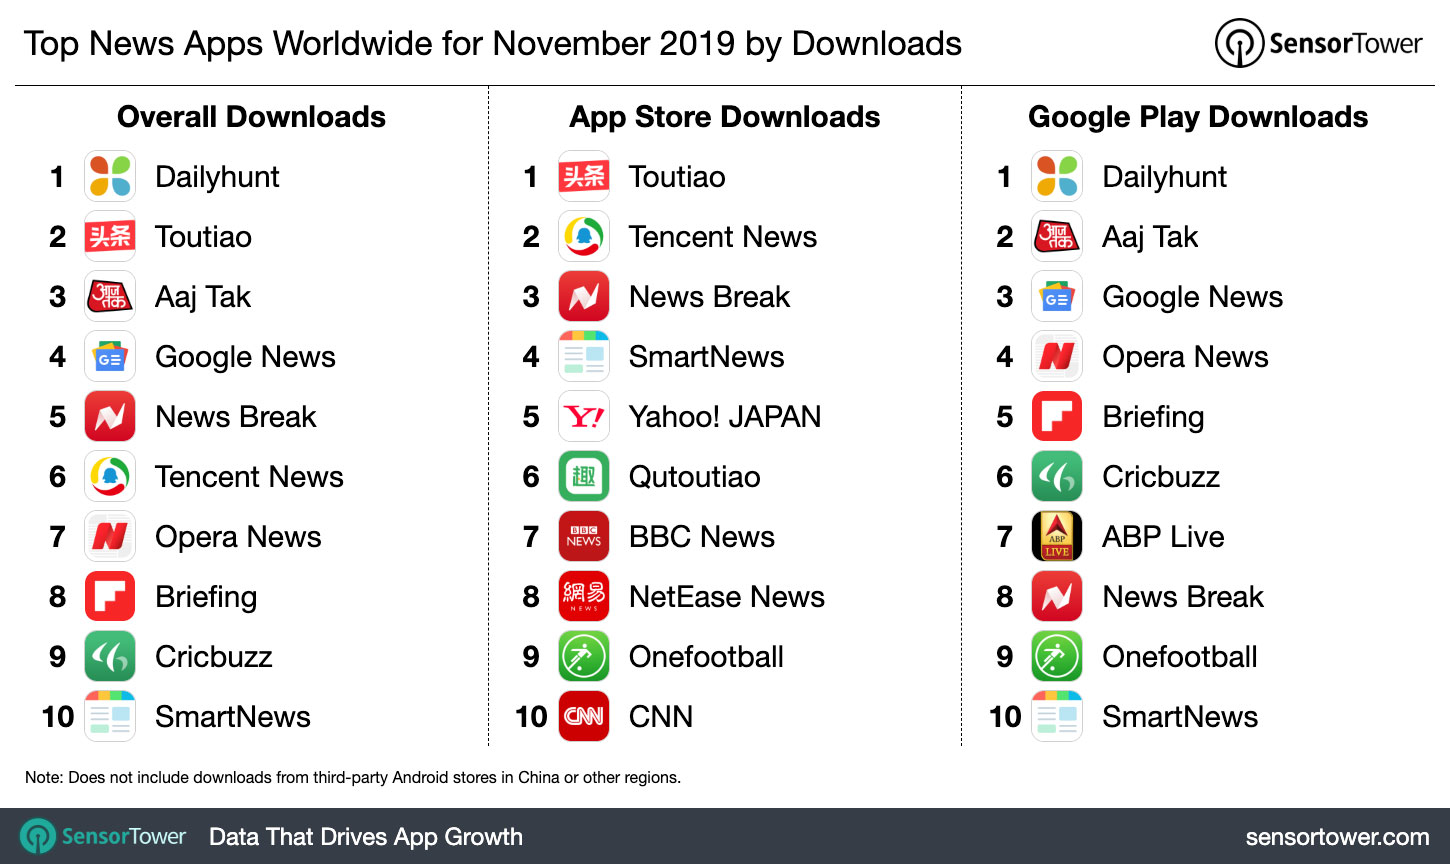 Top News Apps Worldwide for November 2019 by Downloads